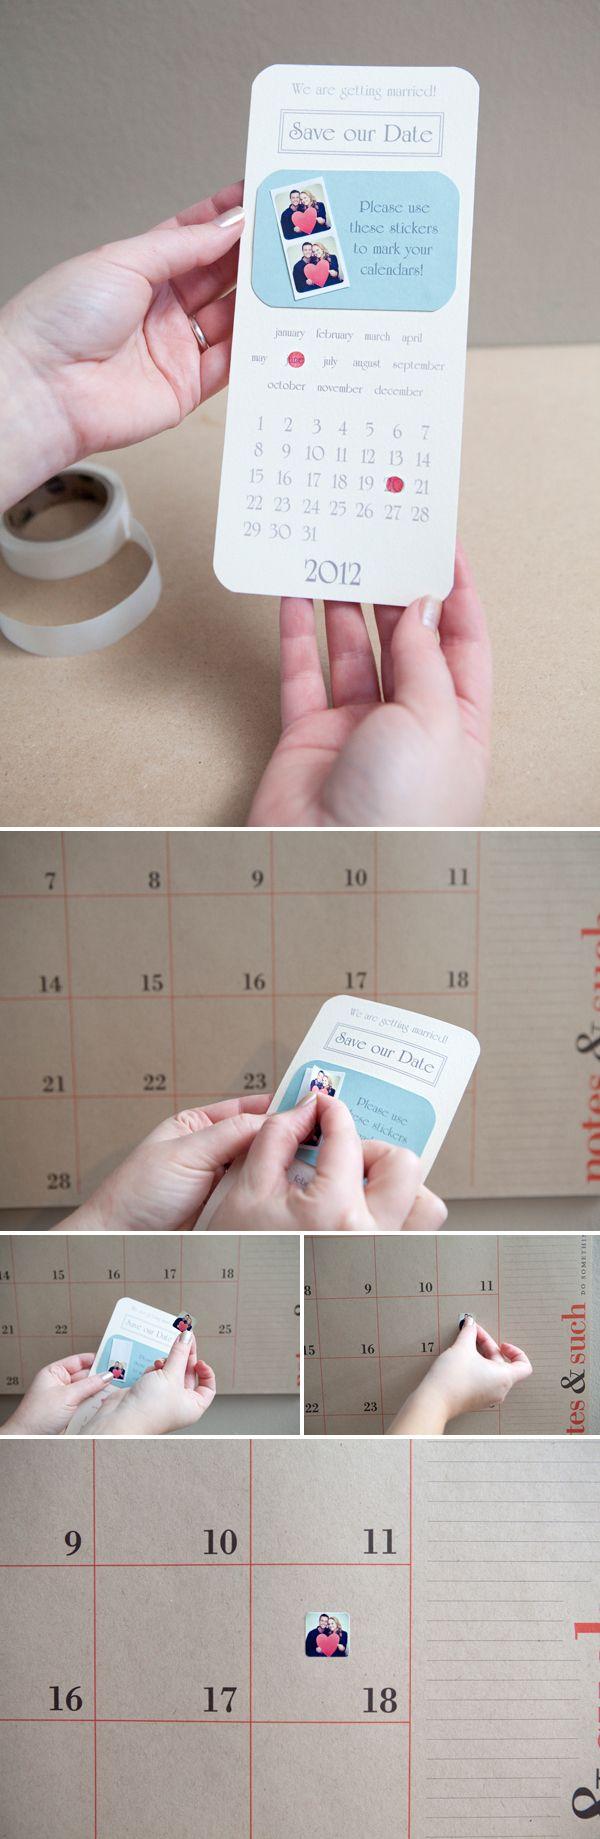 Свадьба - How To Make Super Cute DIY Instagram Save The Date Invitations!